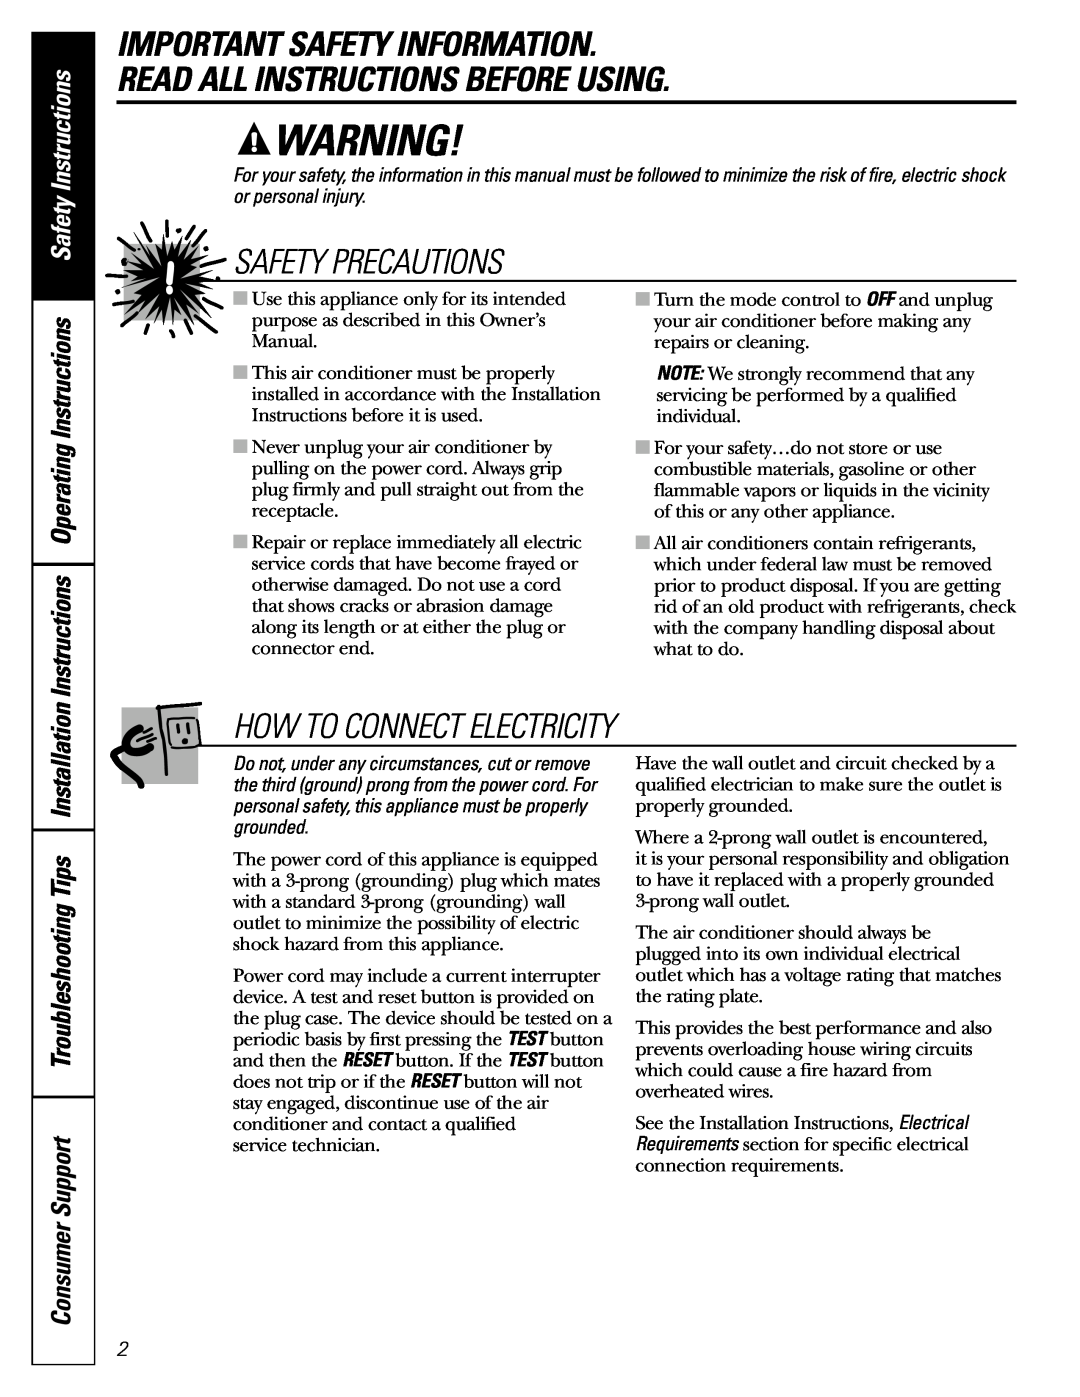 GE AGL06 Important Safety Information, Read All Instructions Before Using, Safety Precautions, How To Connect Electricity 